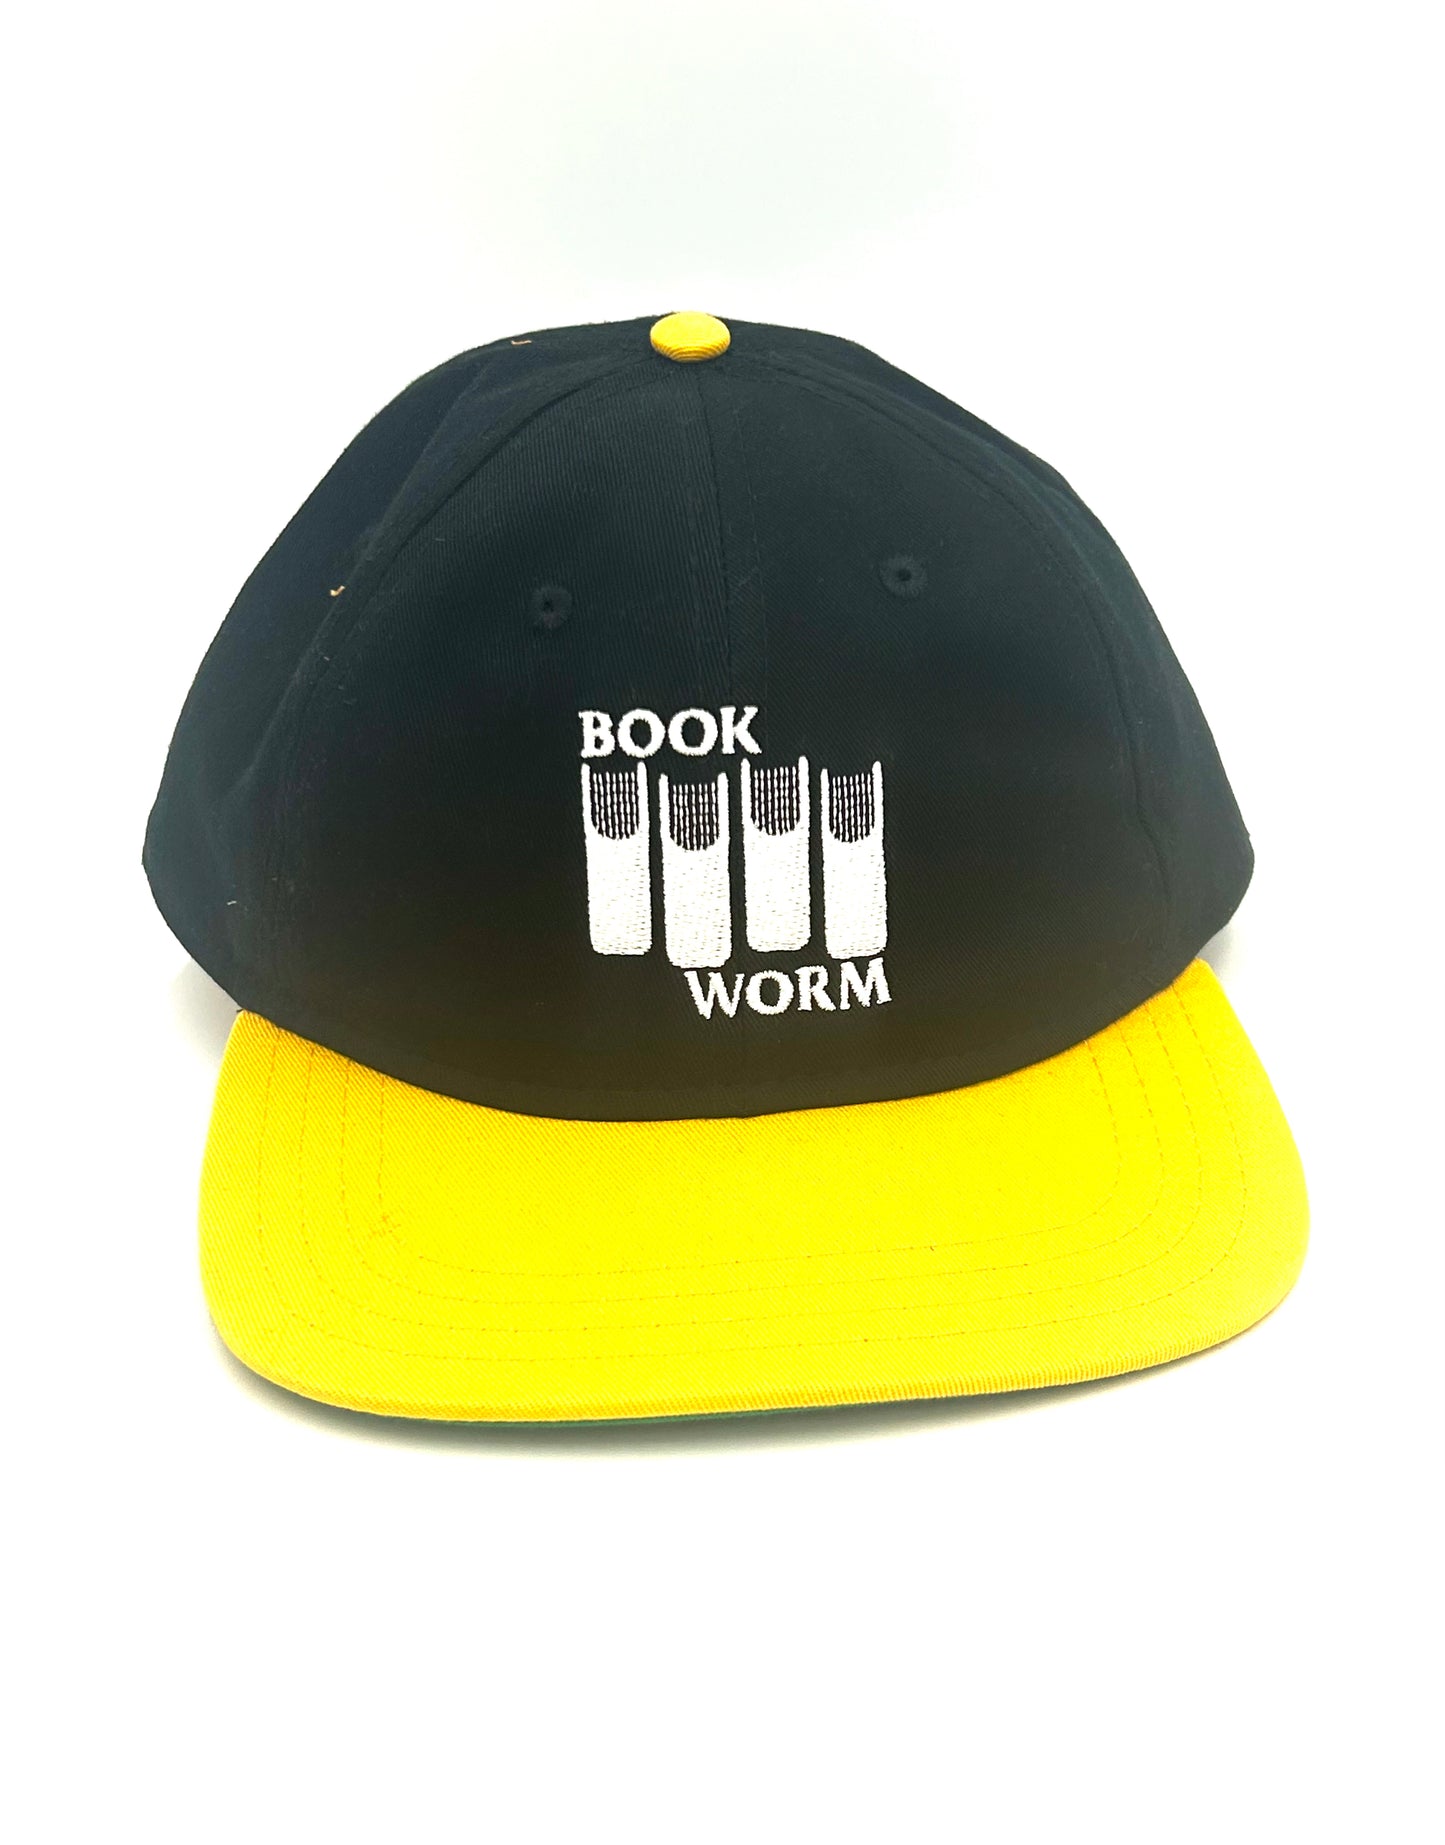 Library “Book Worm” Hat Black/Gold